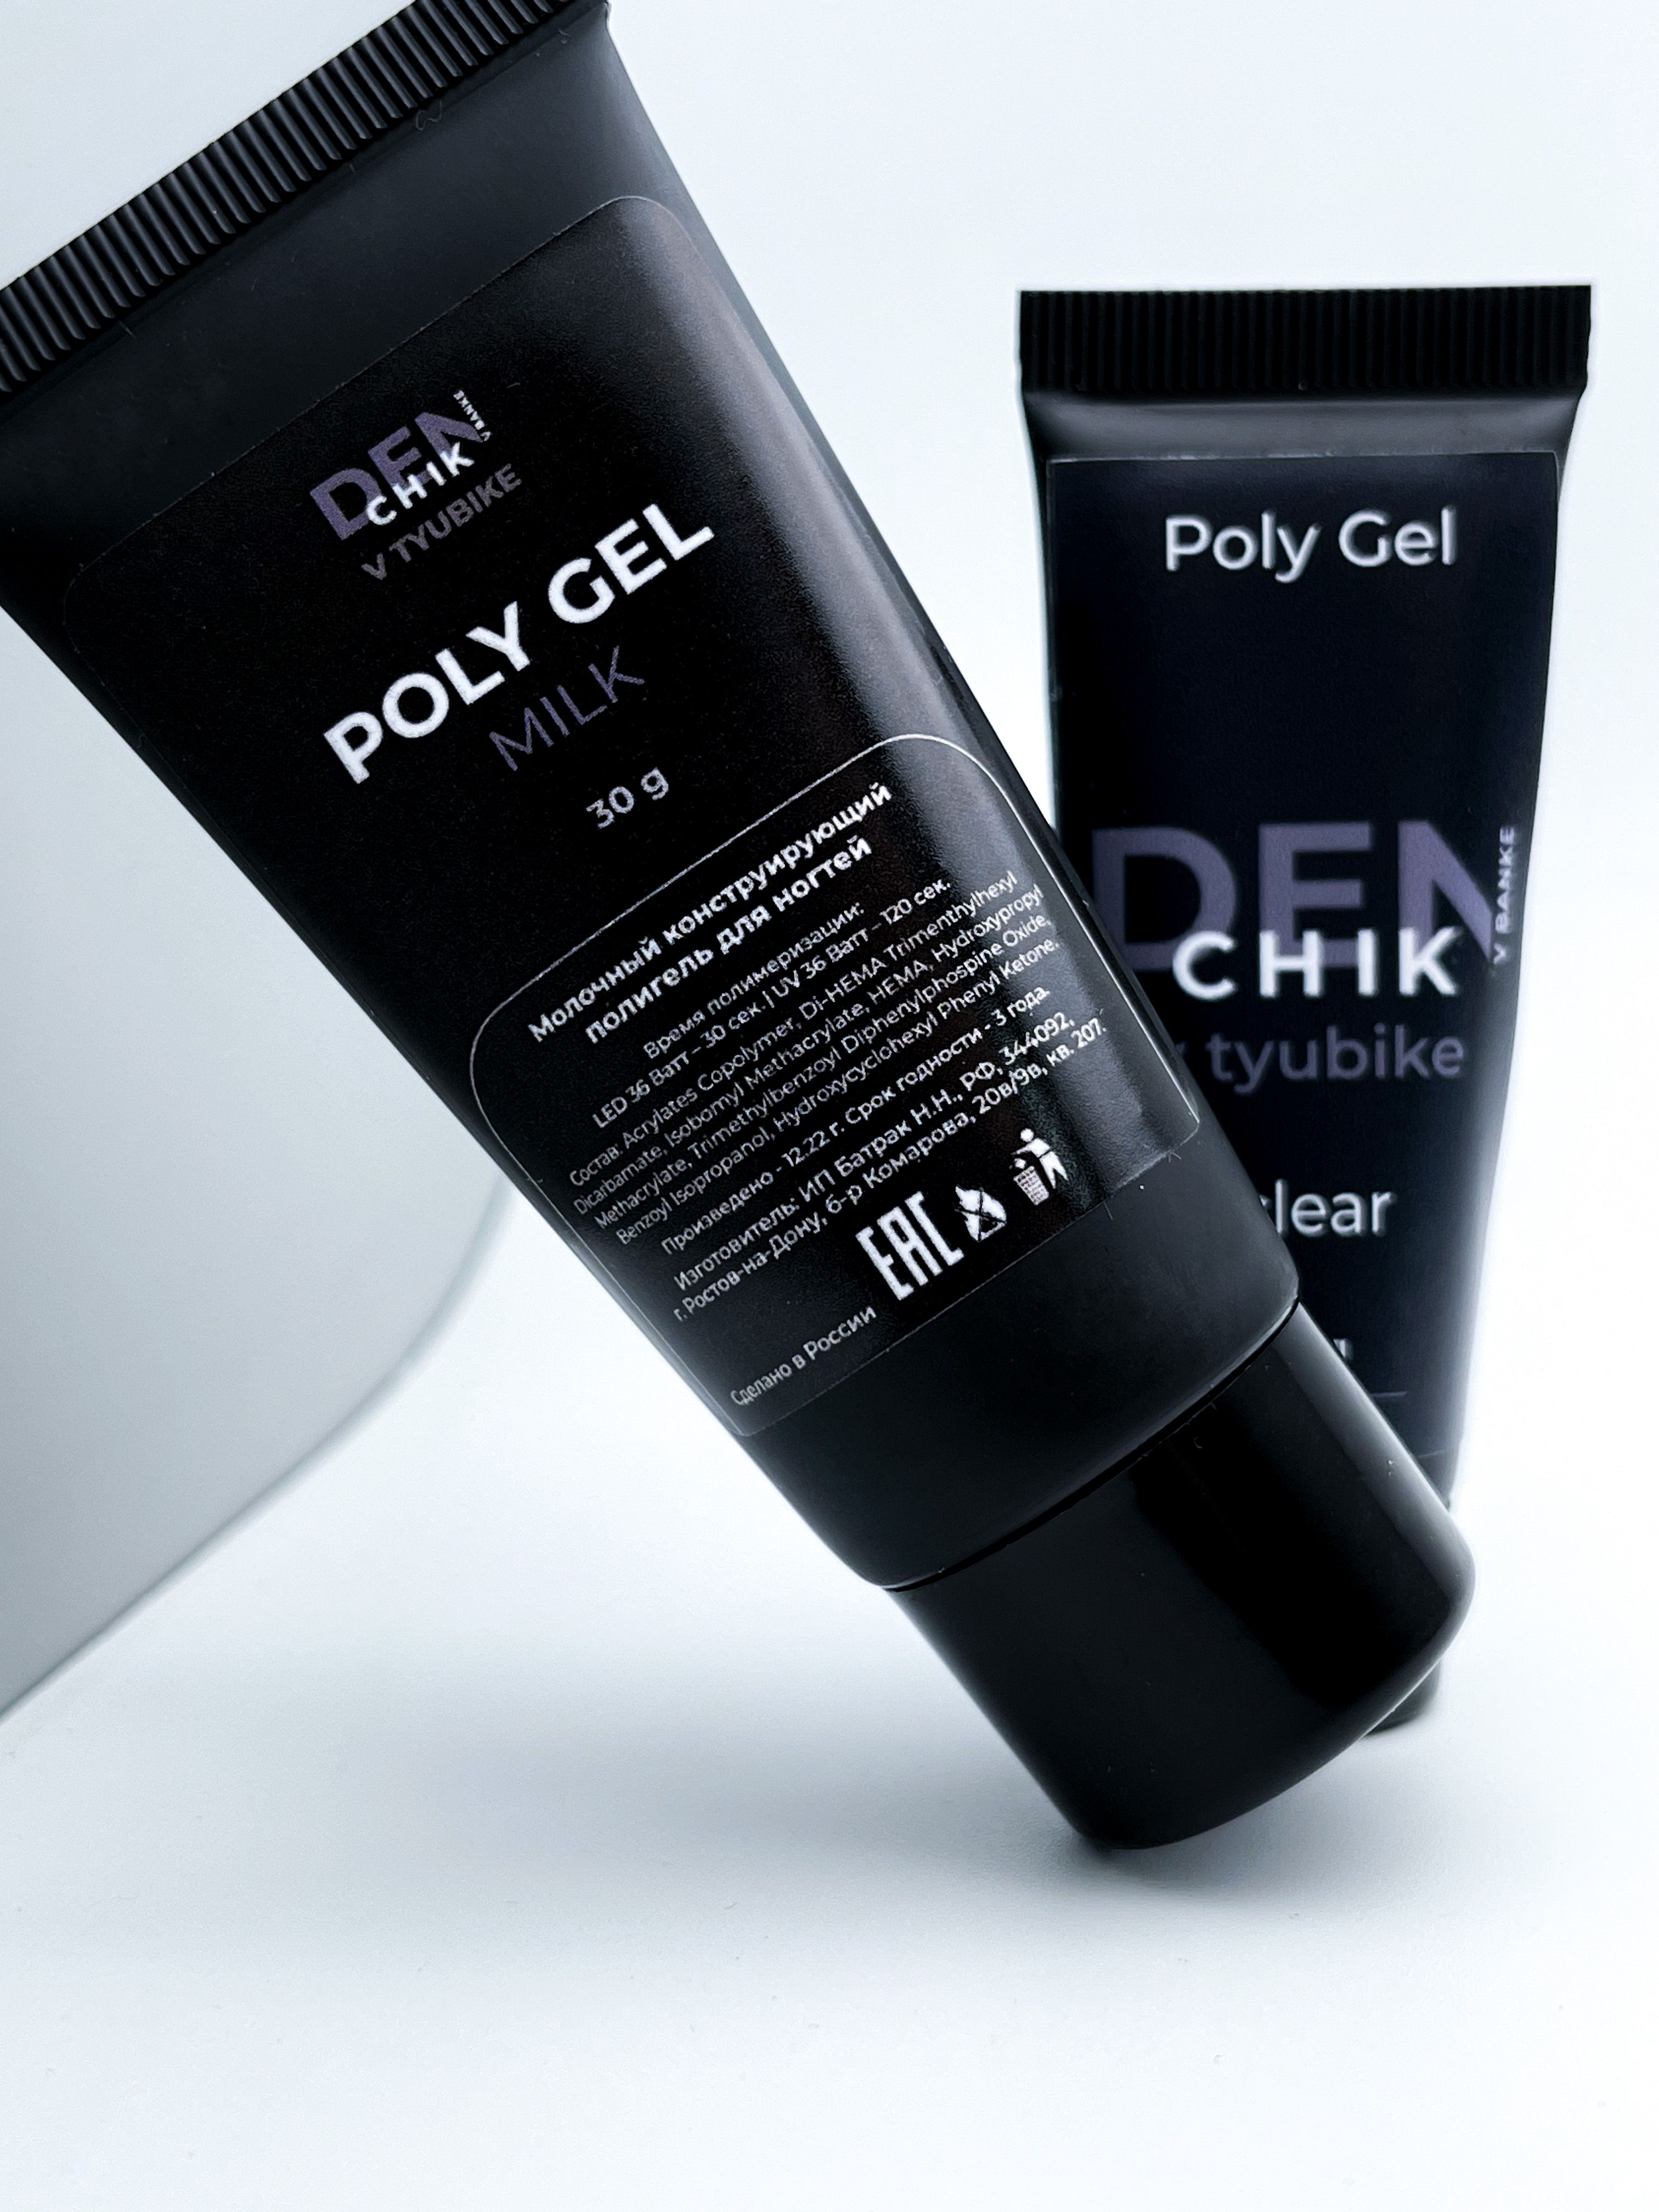 Poly gel. For you Poly Gel.